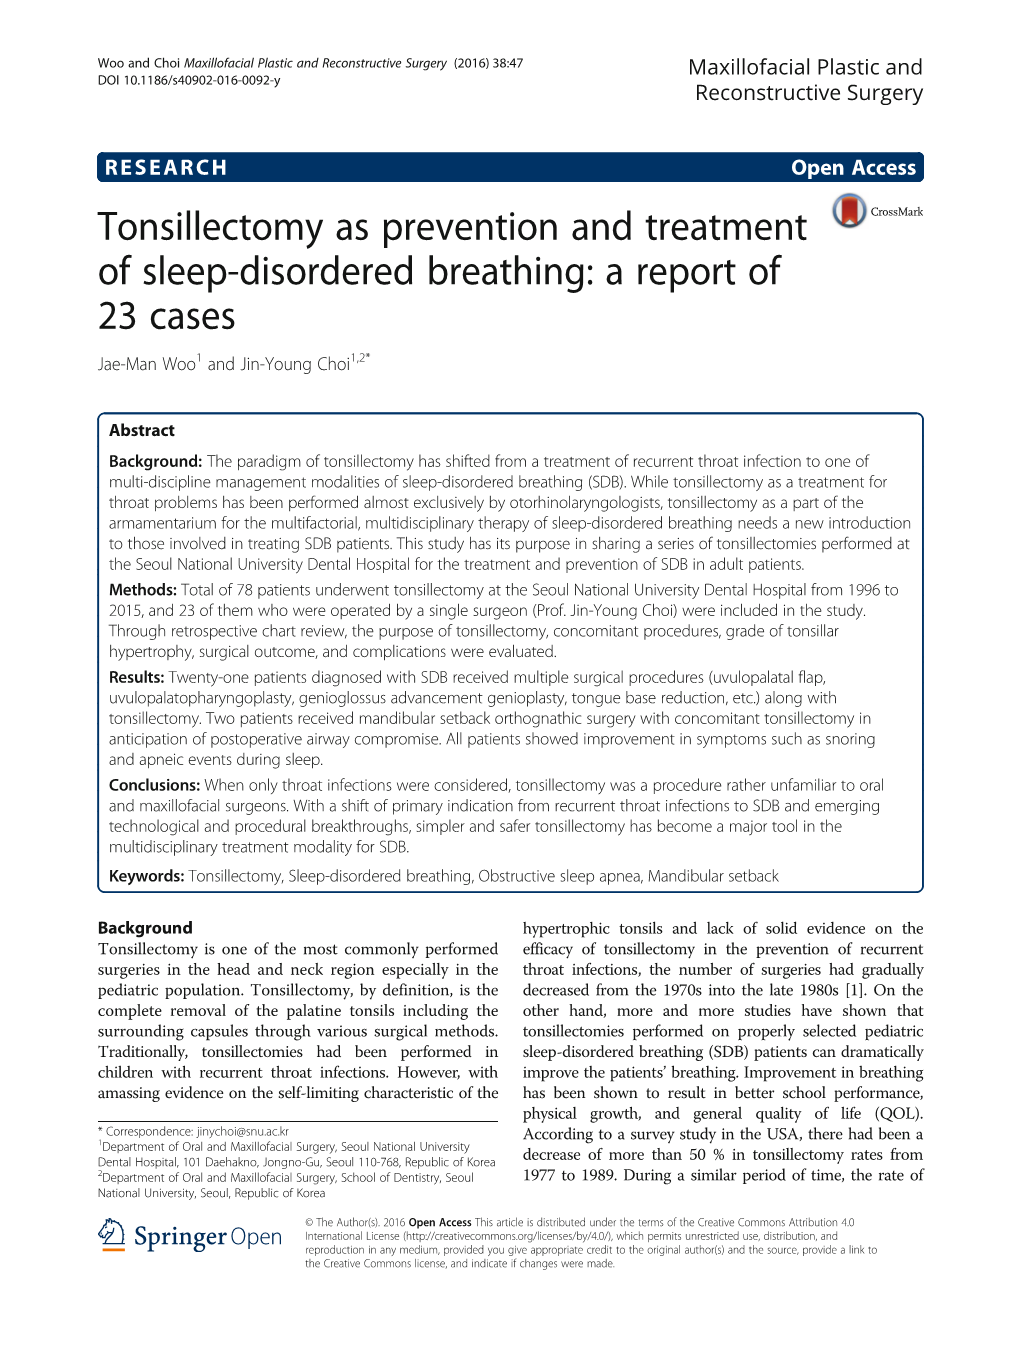 Tonsillectomy As Prevention and Treatment of Sleep-Disordered Breathing: a Report of 23 Cases Jae-Man Woo1 and Jin-Young Choi1,2*